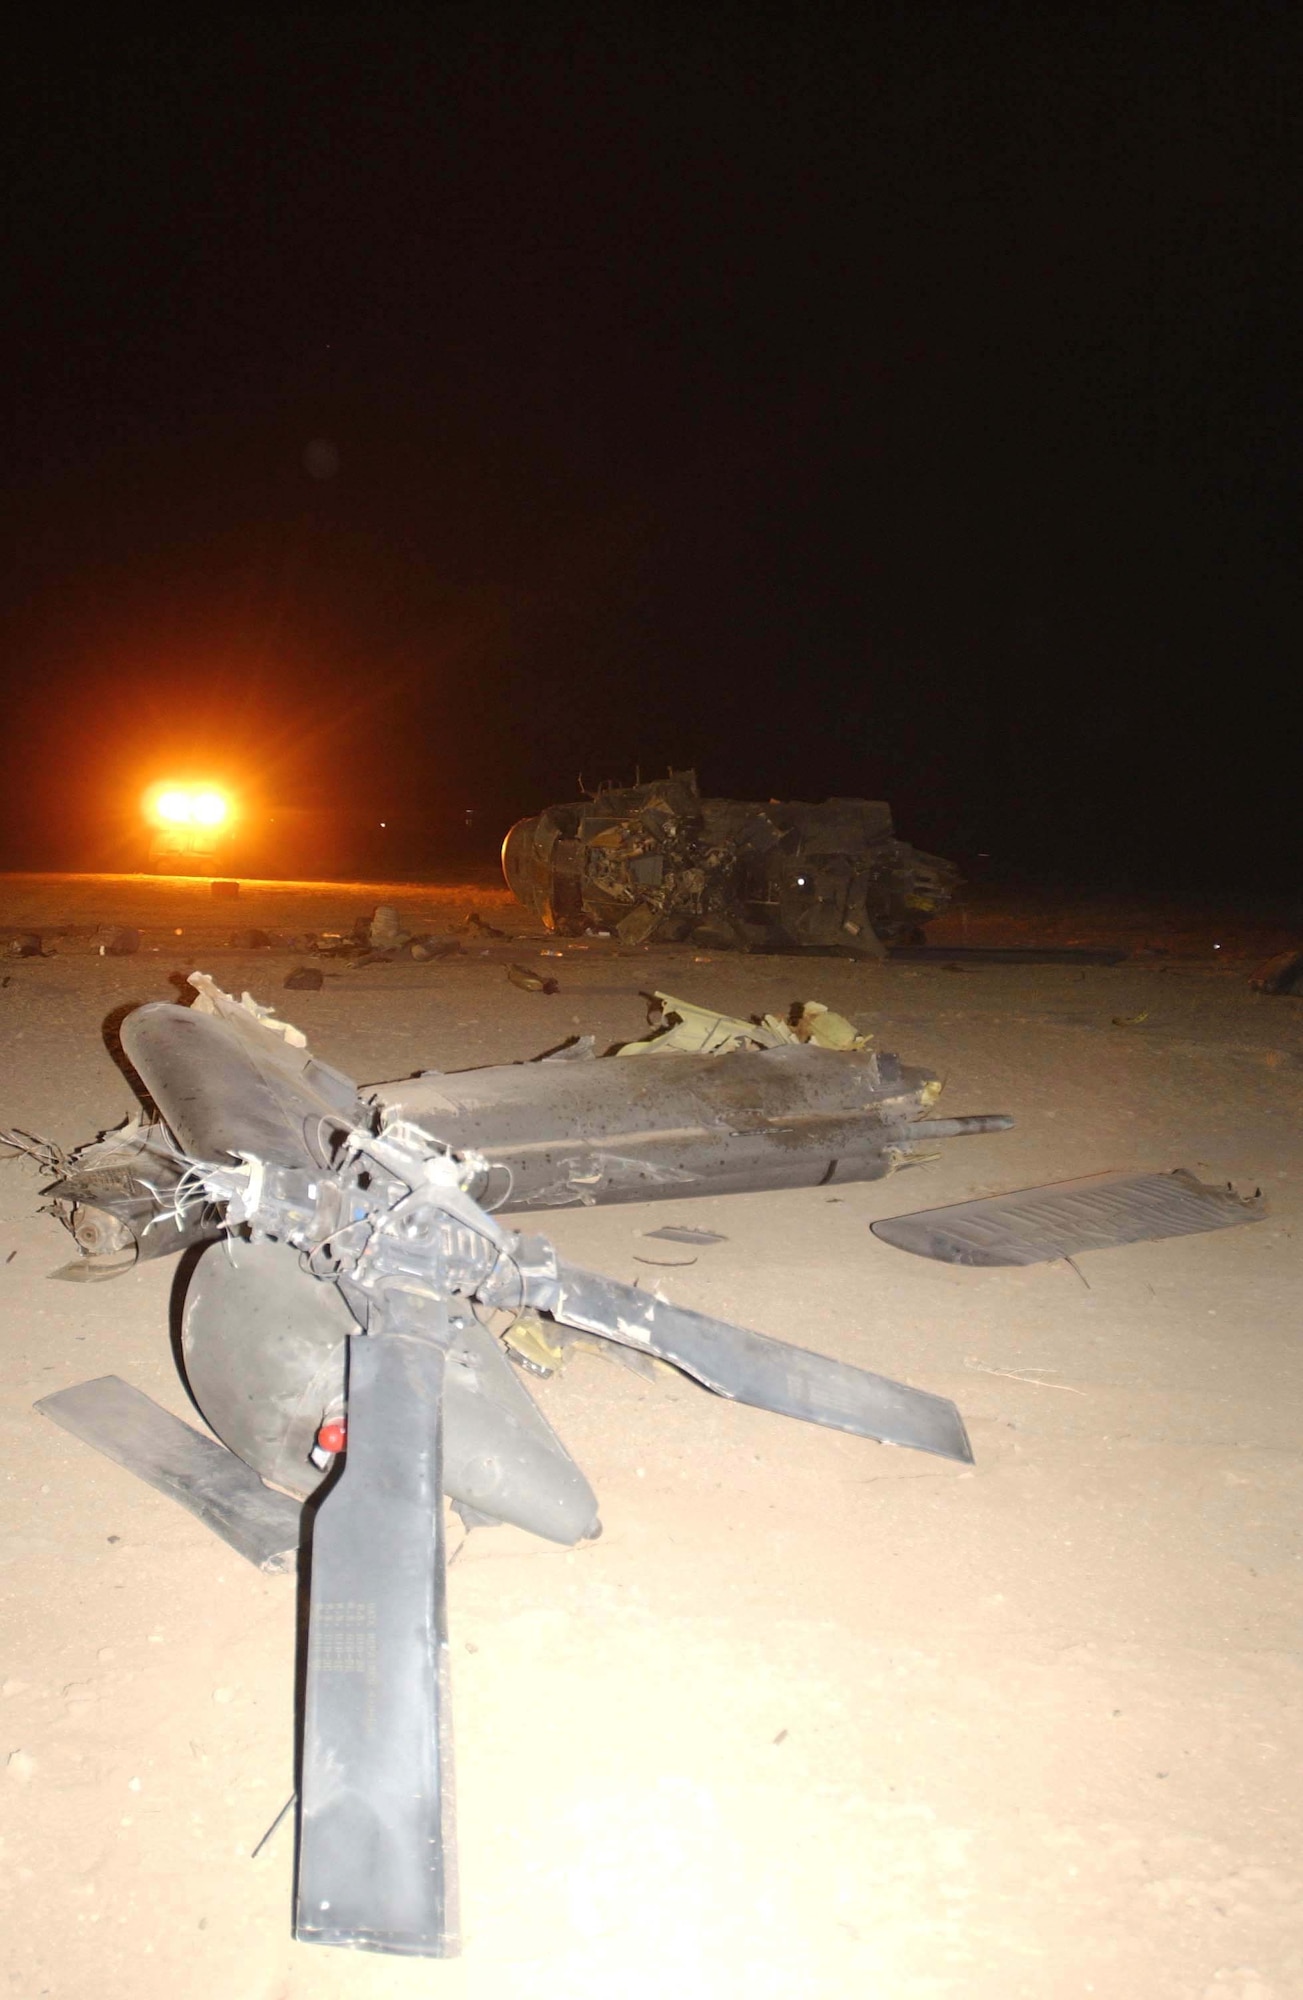 TALLIL AIR BASE, Iraq -- Lights from a portable lighting cart illuminate the wreckage of an Army UH-60 Blackhawk crash across the flightline here Sept. 21.  All four Soldiers on board were rescued from the helicopter by people of the 407th Air Expeditionary Group and 407th Expeditionary Medical Squadron.  (U.S. Air Force photo by Staff Sgt. Craig Clapper)